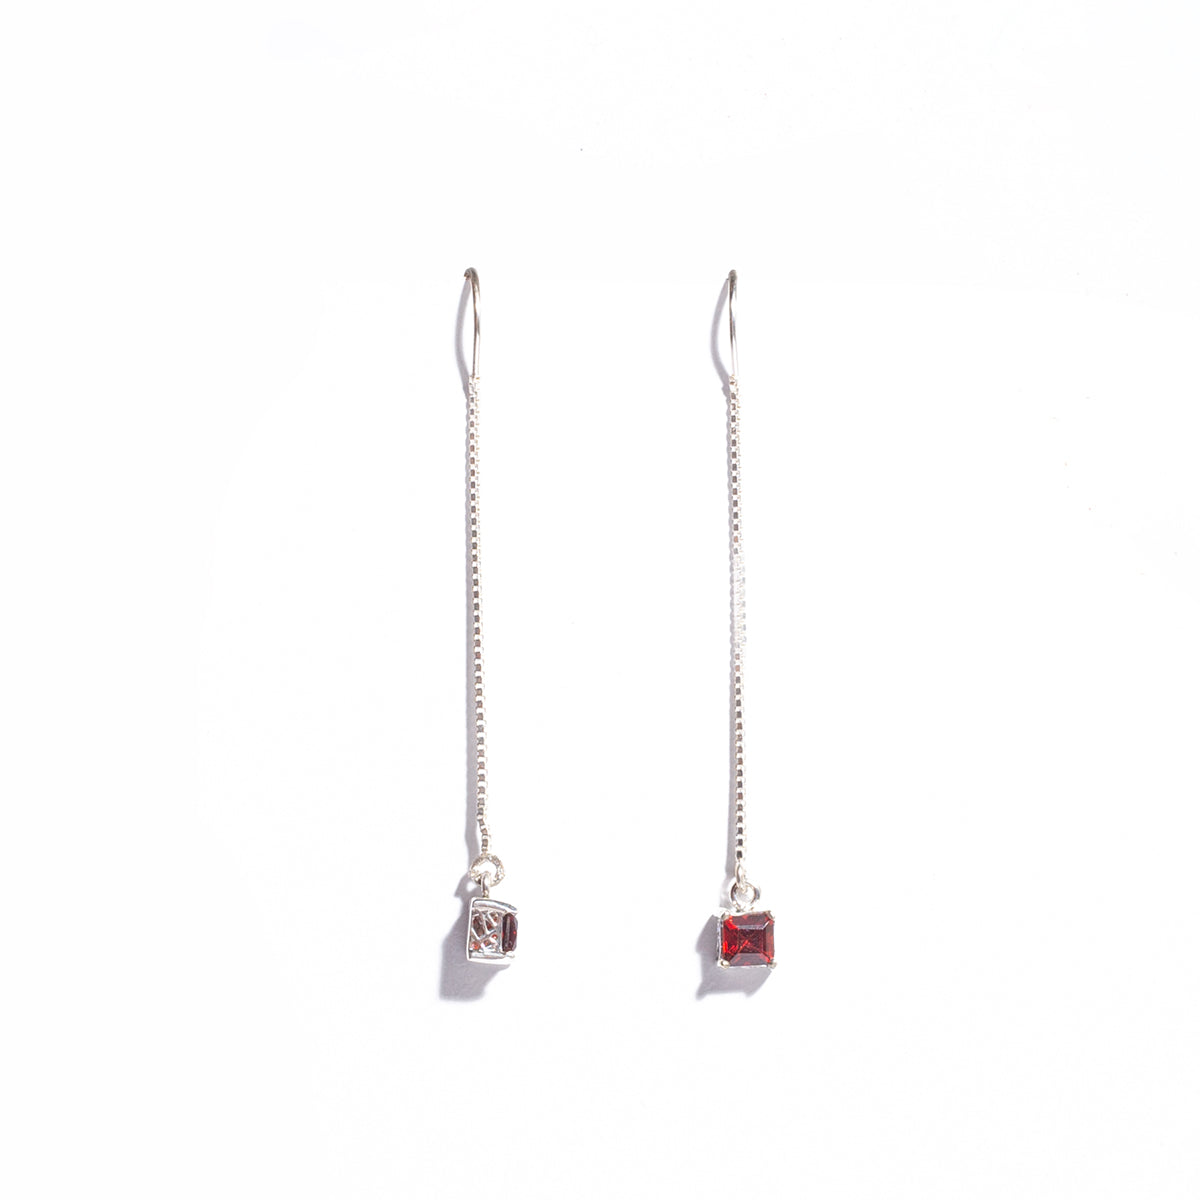 Silver pendants with medium square box Earrings 